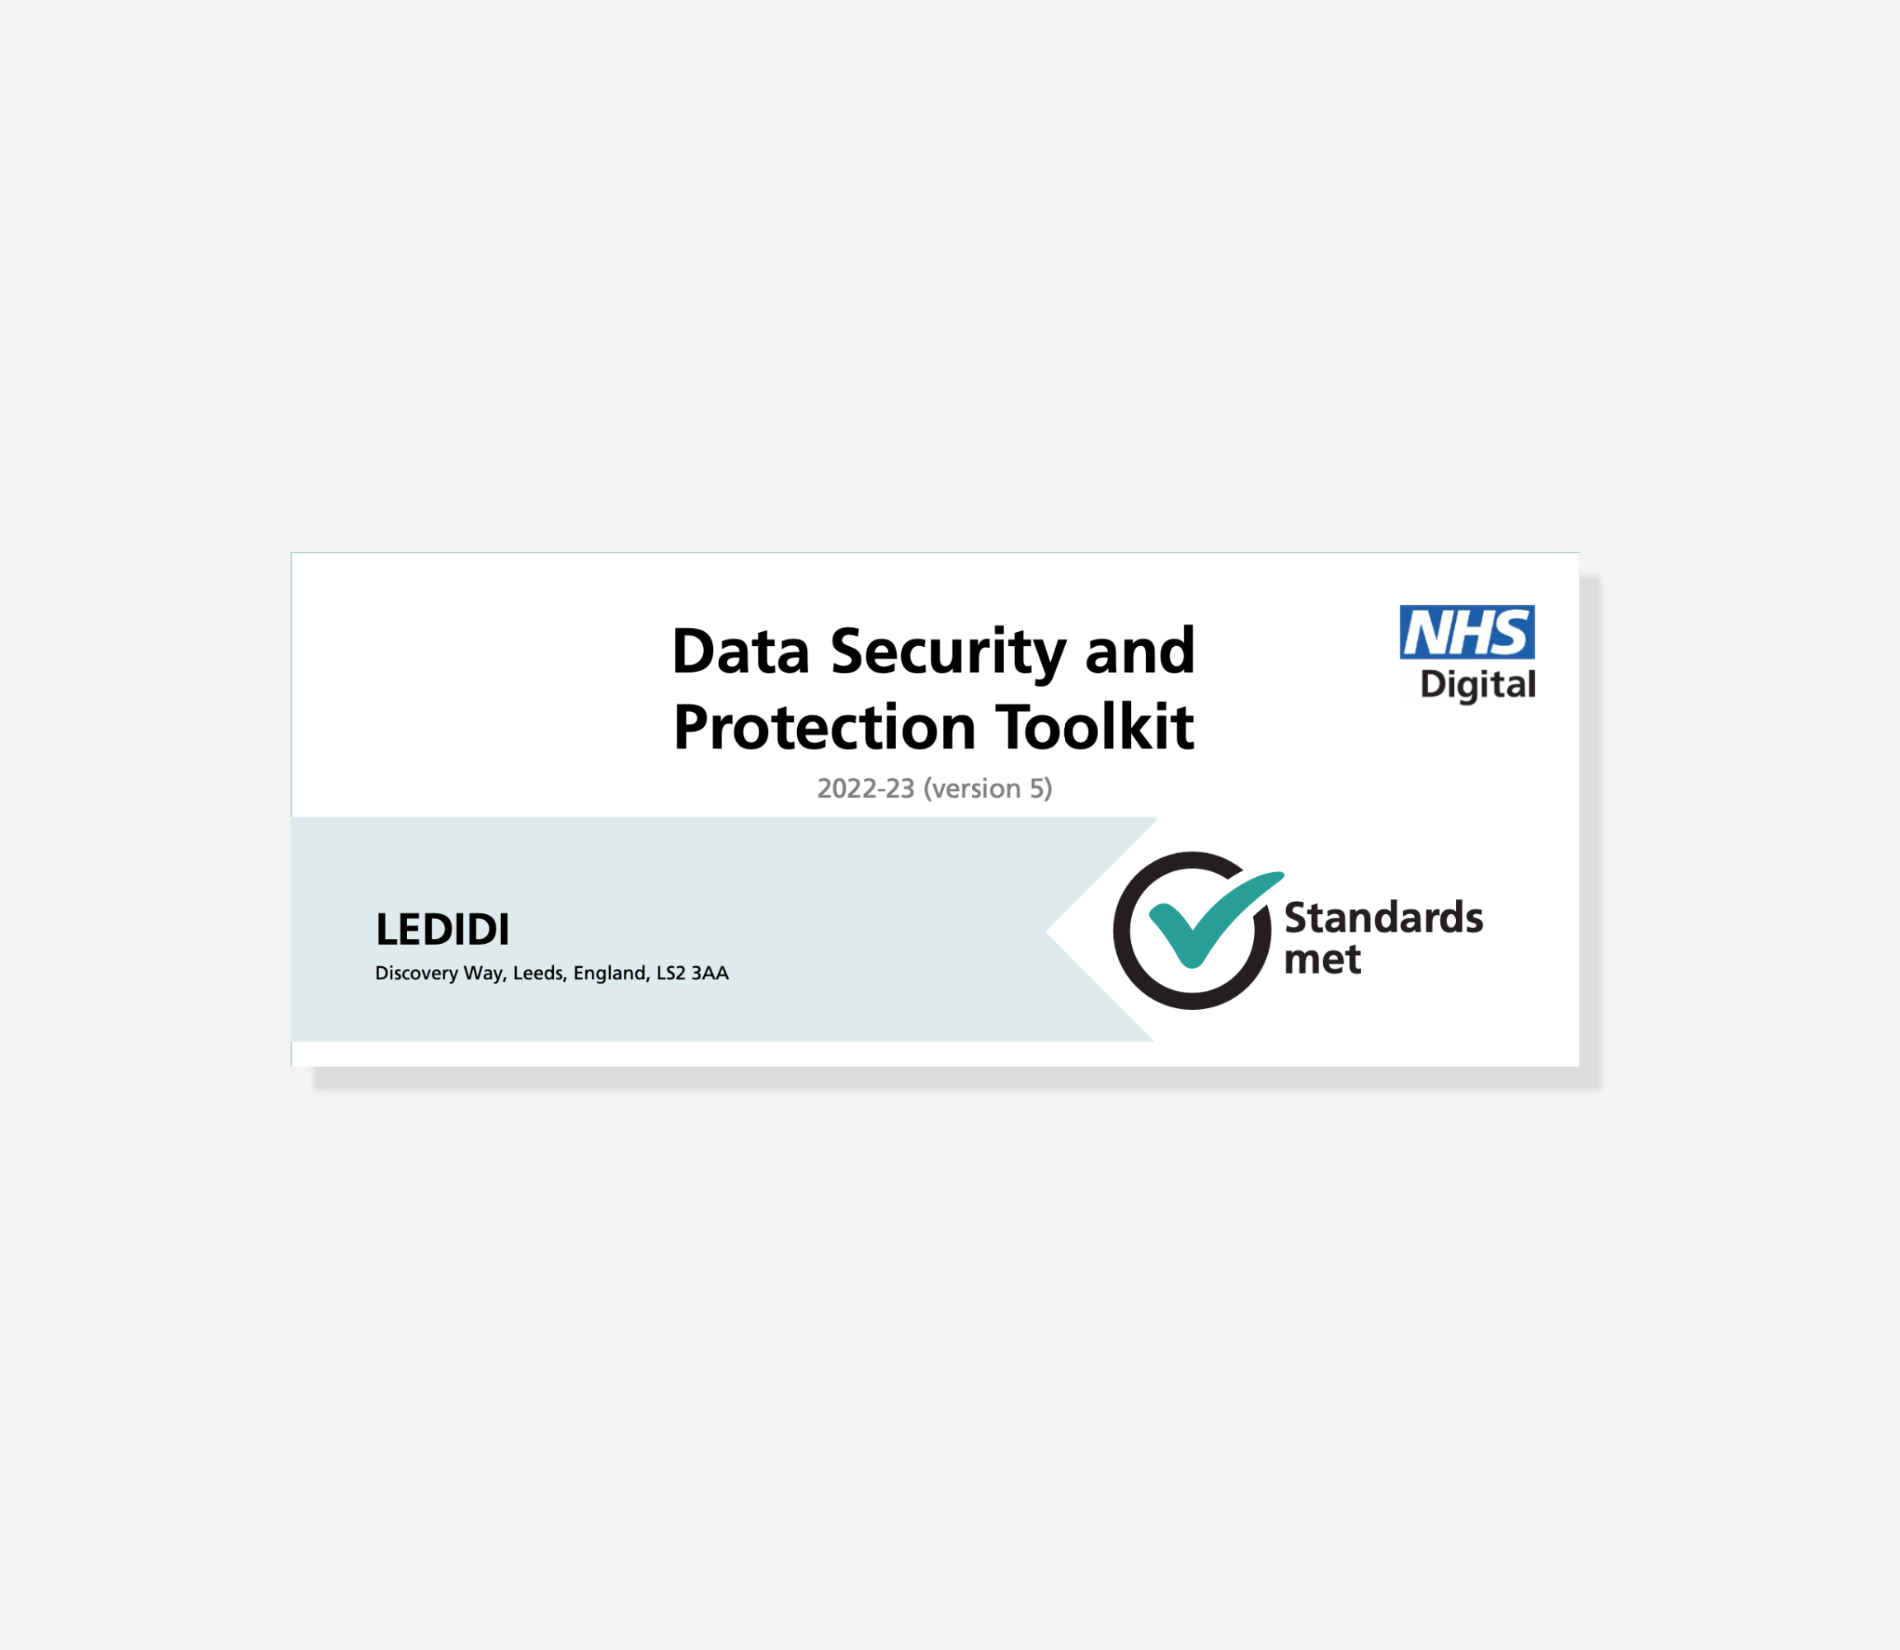 Ledidi recognized by the National Health Service (NHS) for commitment to data security